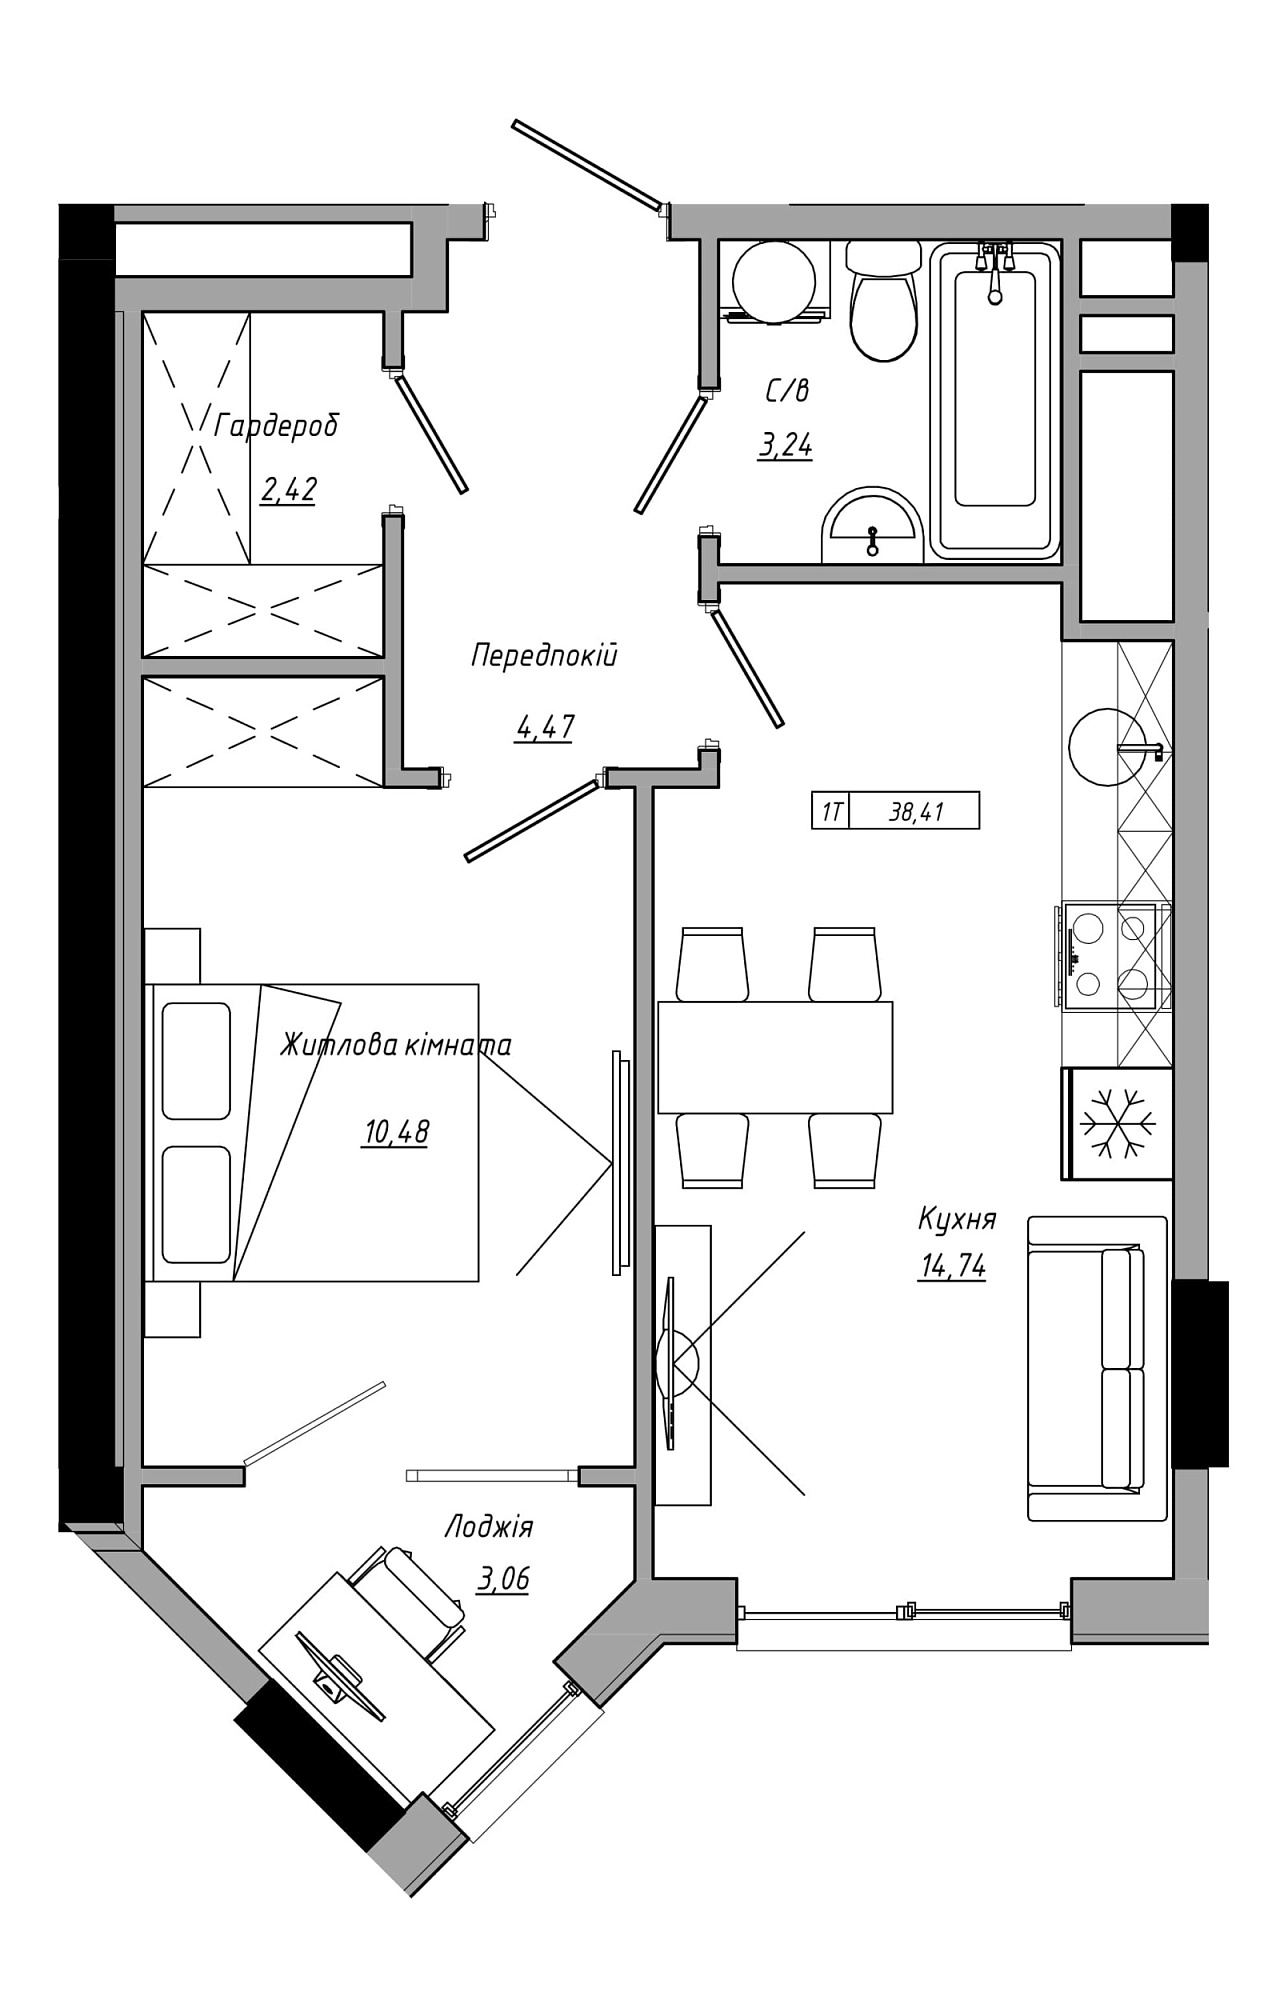 Planning 1-rm flats area 38.41m2, AB-21-09/00022.